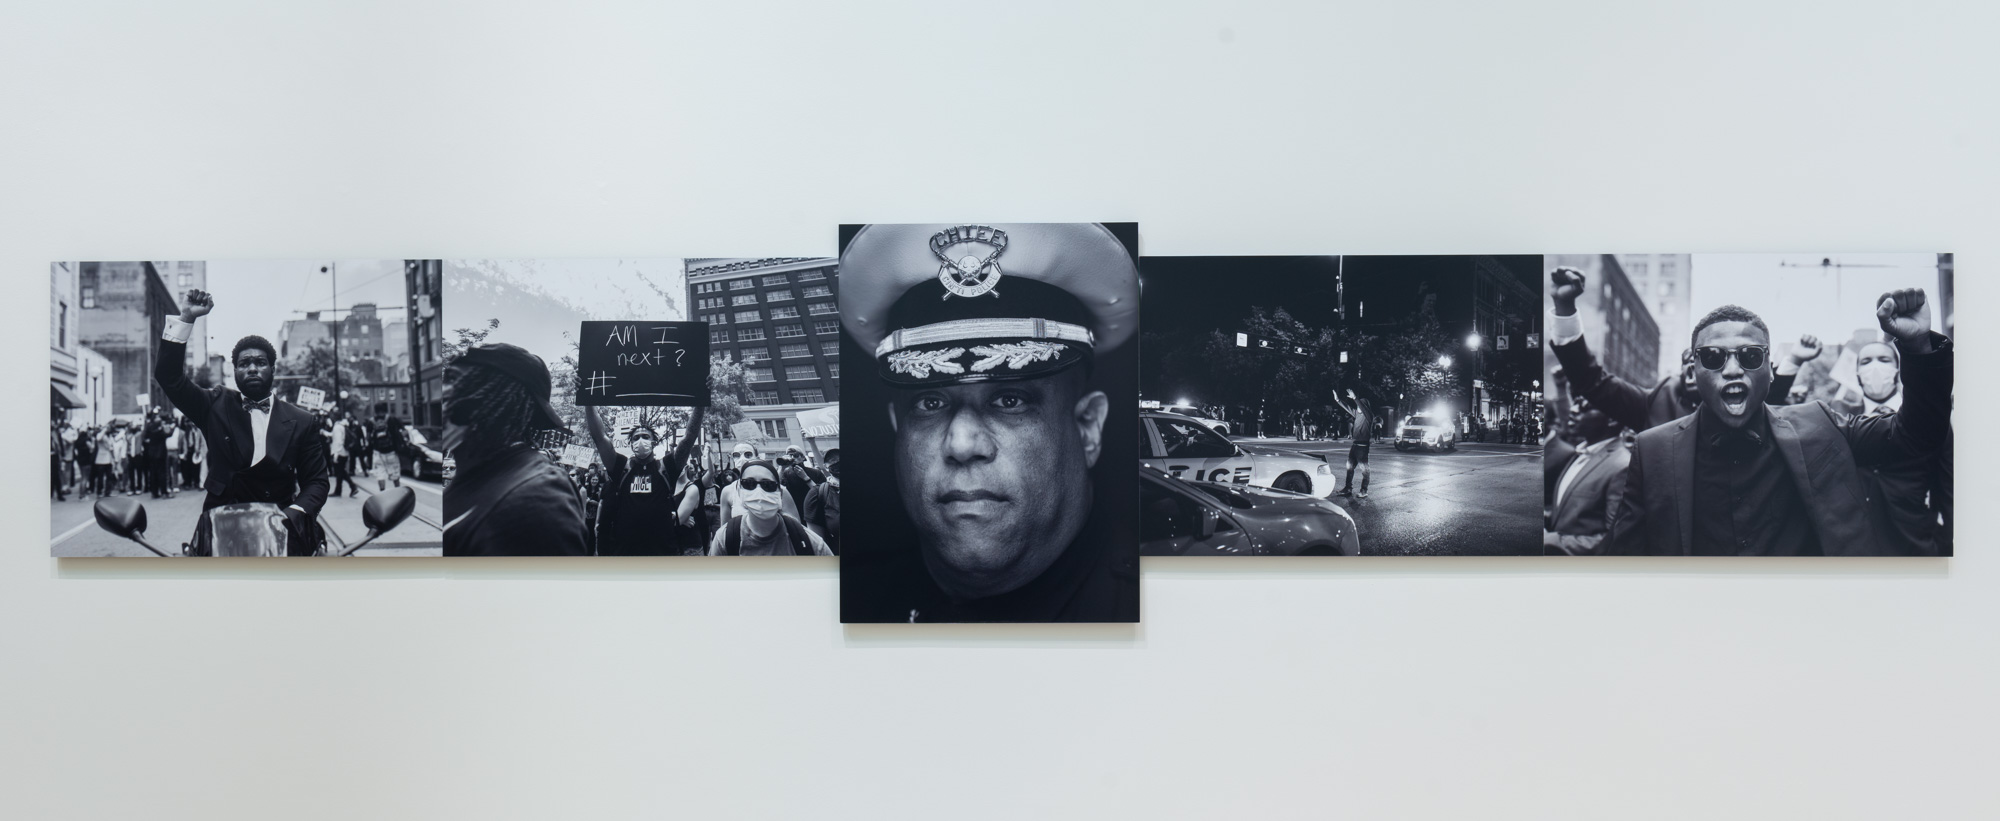 Kevin J. Watkins' Arrest the cops that killed (insert name), a series of black and white photographs of African Americans in protest. The center photograph is a close up portrait of an African American police chief in uniform